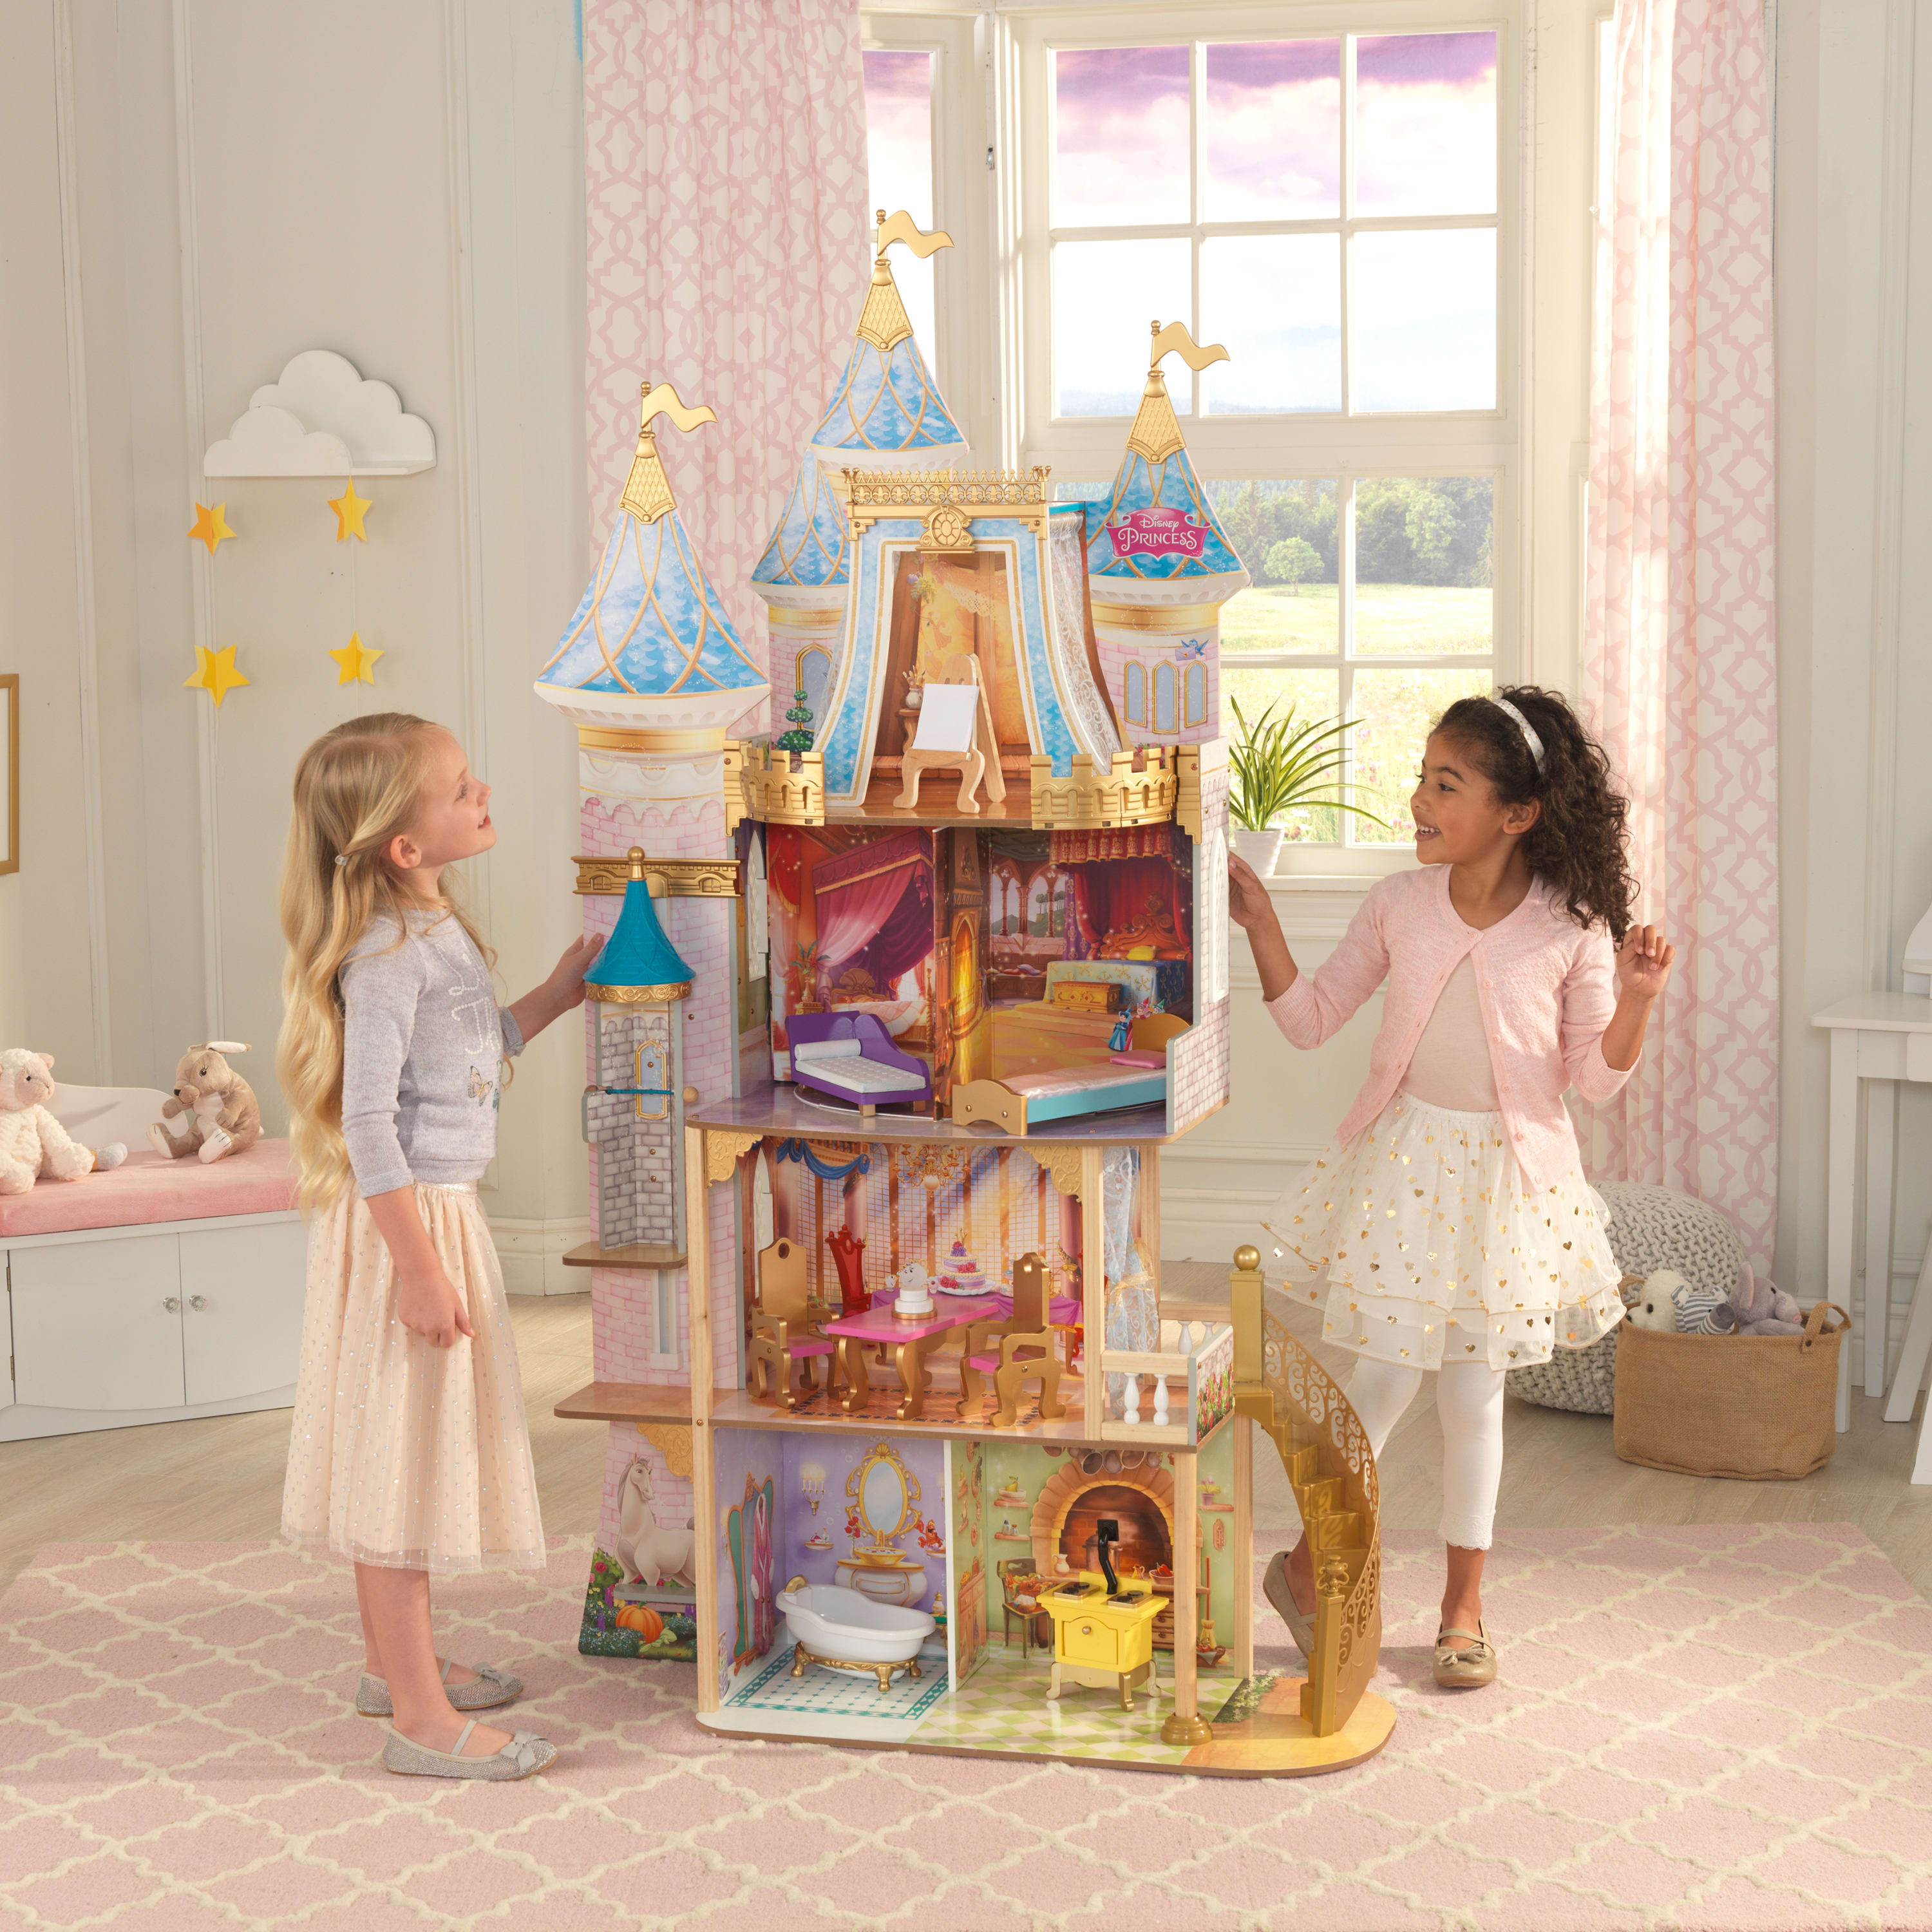 KidKraft Disney Princess Royal Celebration Wooden Castle Dollhouse with 10 Accessories - image 2 of 10